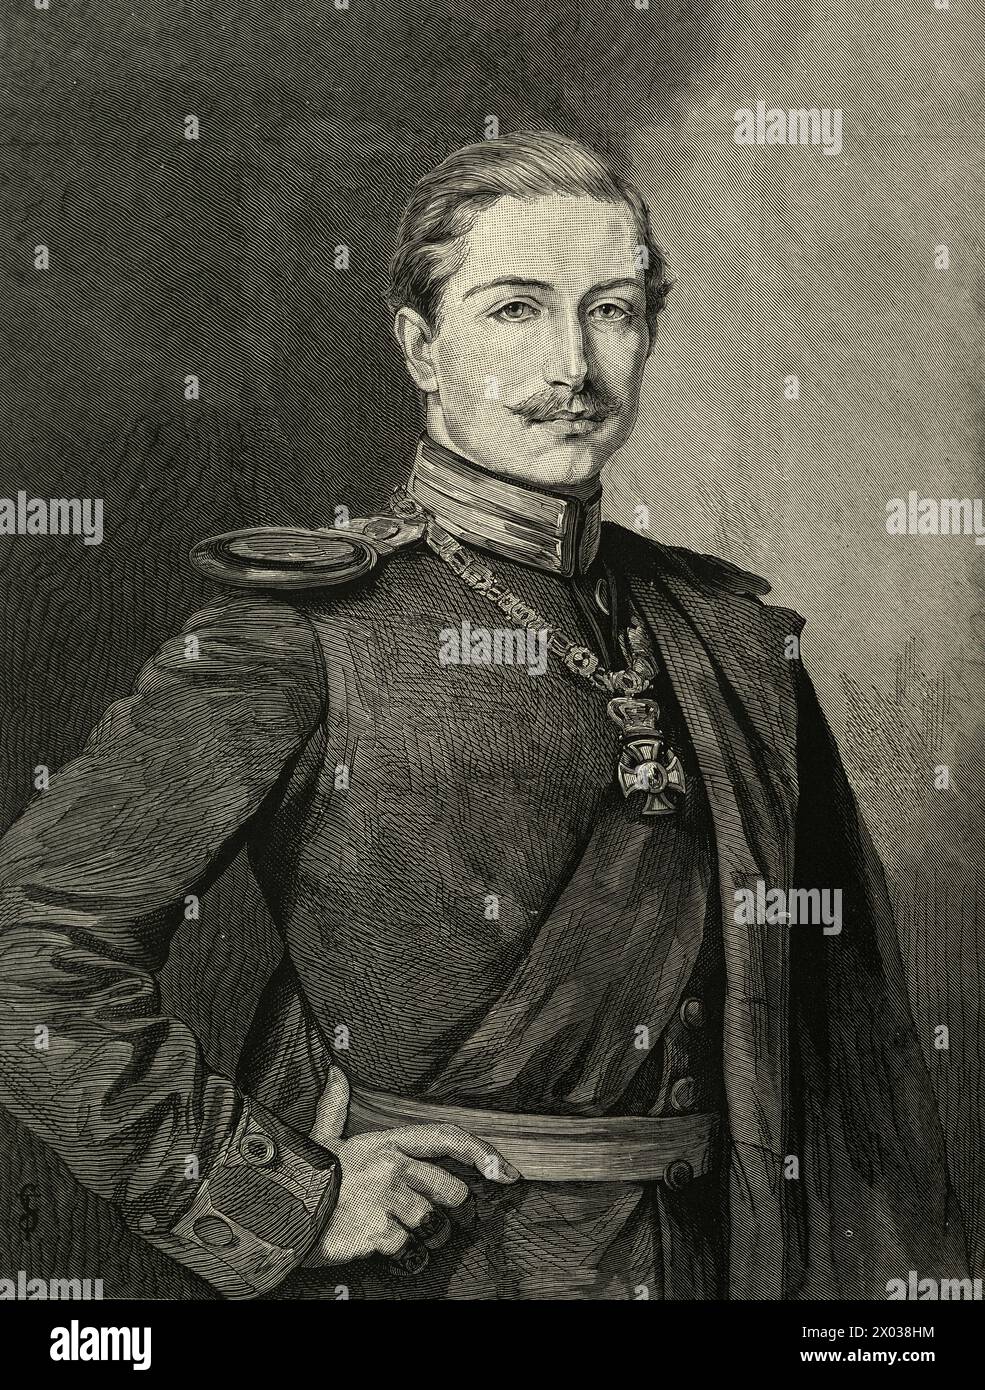 Portrait of Wilhelm II German Emperor and King of Prussia, as Crown Prince, 1881 Stock Photo